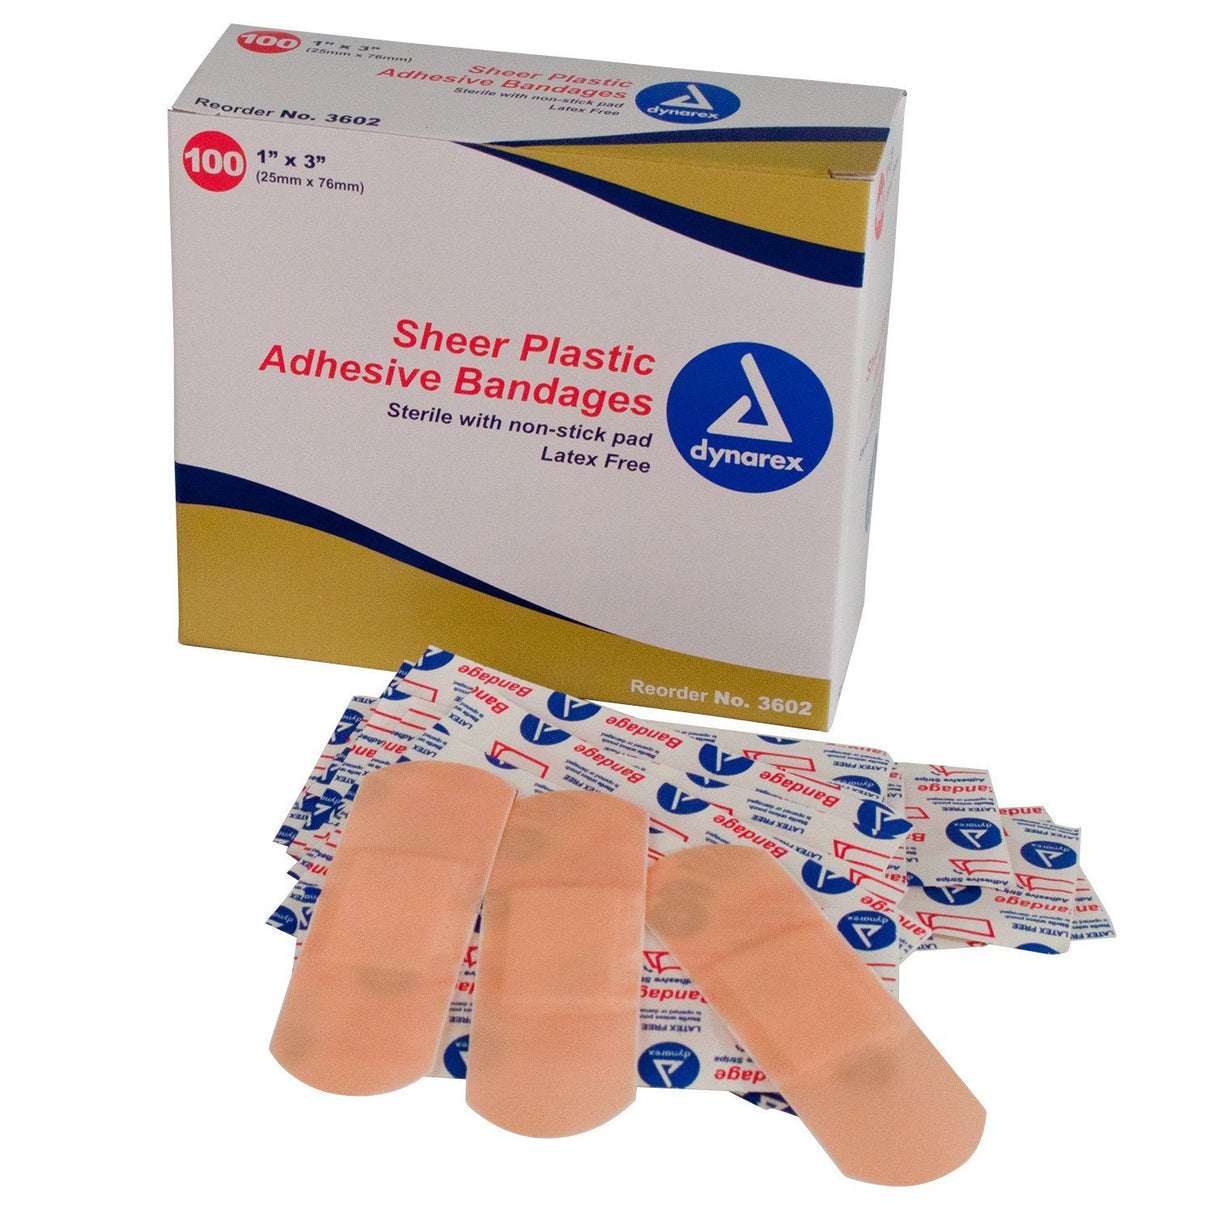 Image of Sheer Plastic Adhesive Bandages Sterile, 1" x 3"